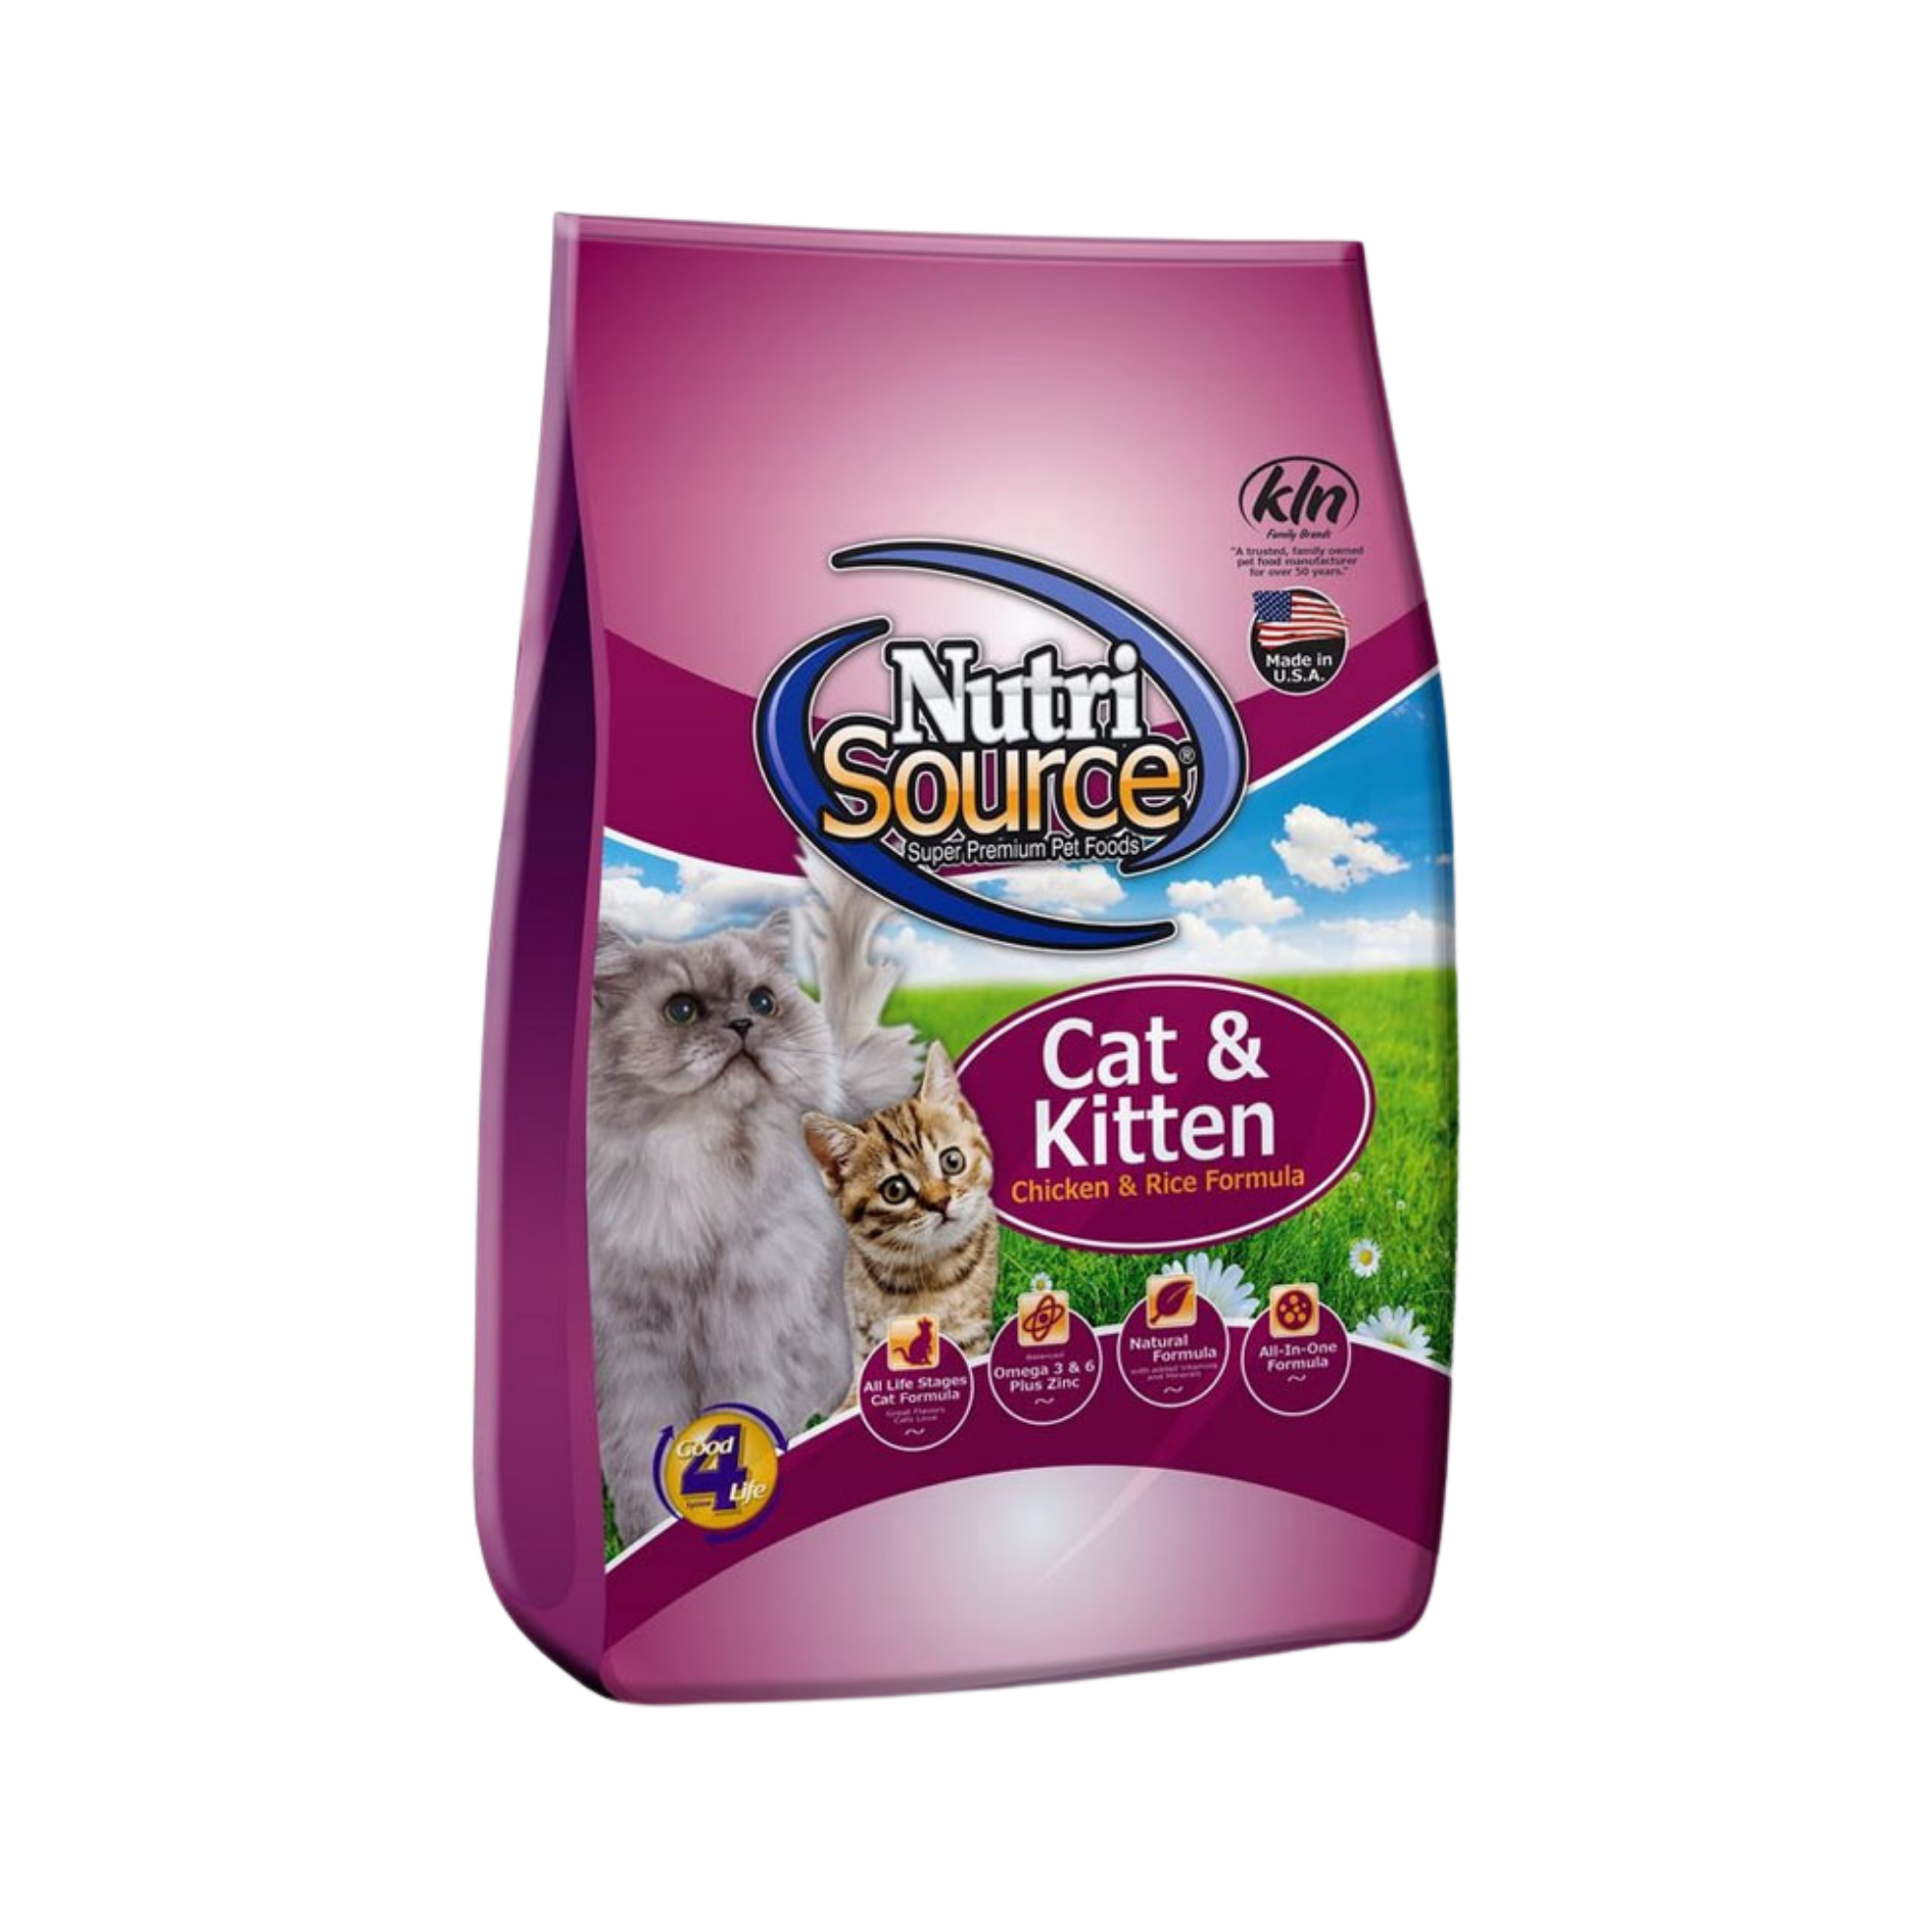 NutriSource Chicken & Rice Formula Cat Food - Mutts & Co.